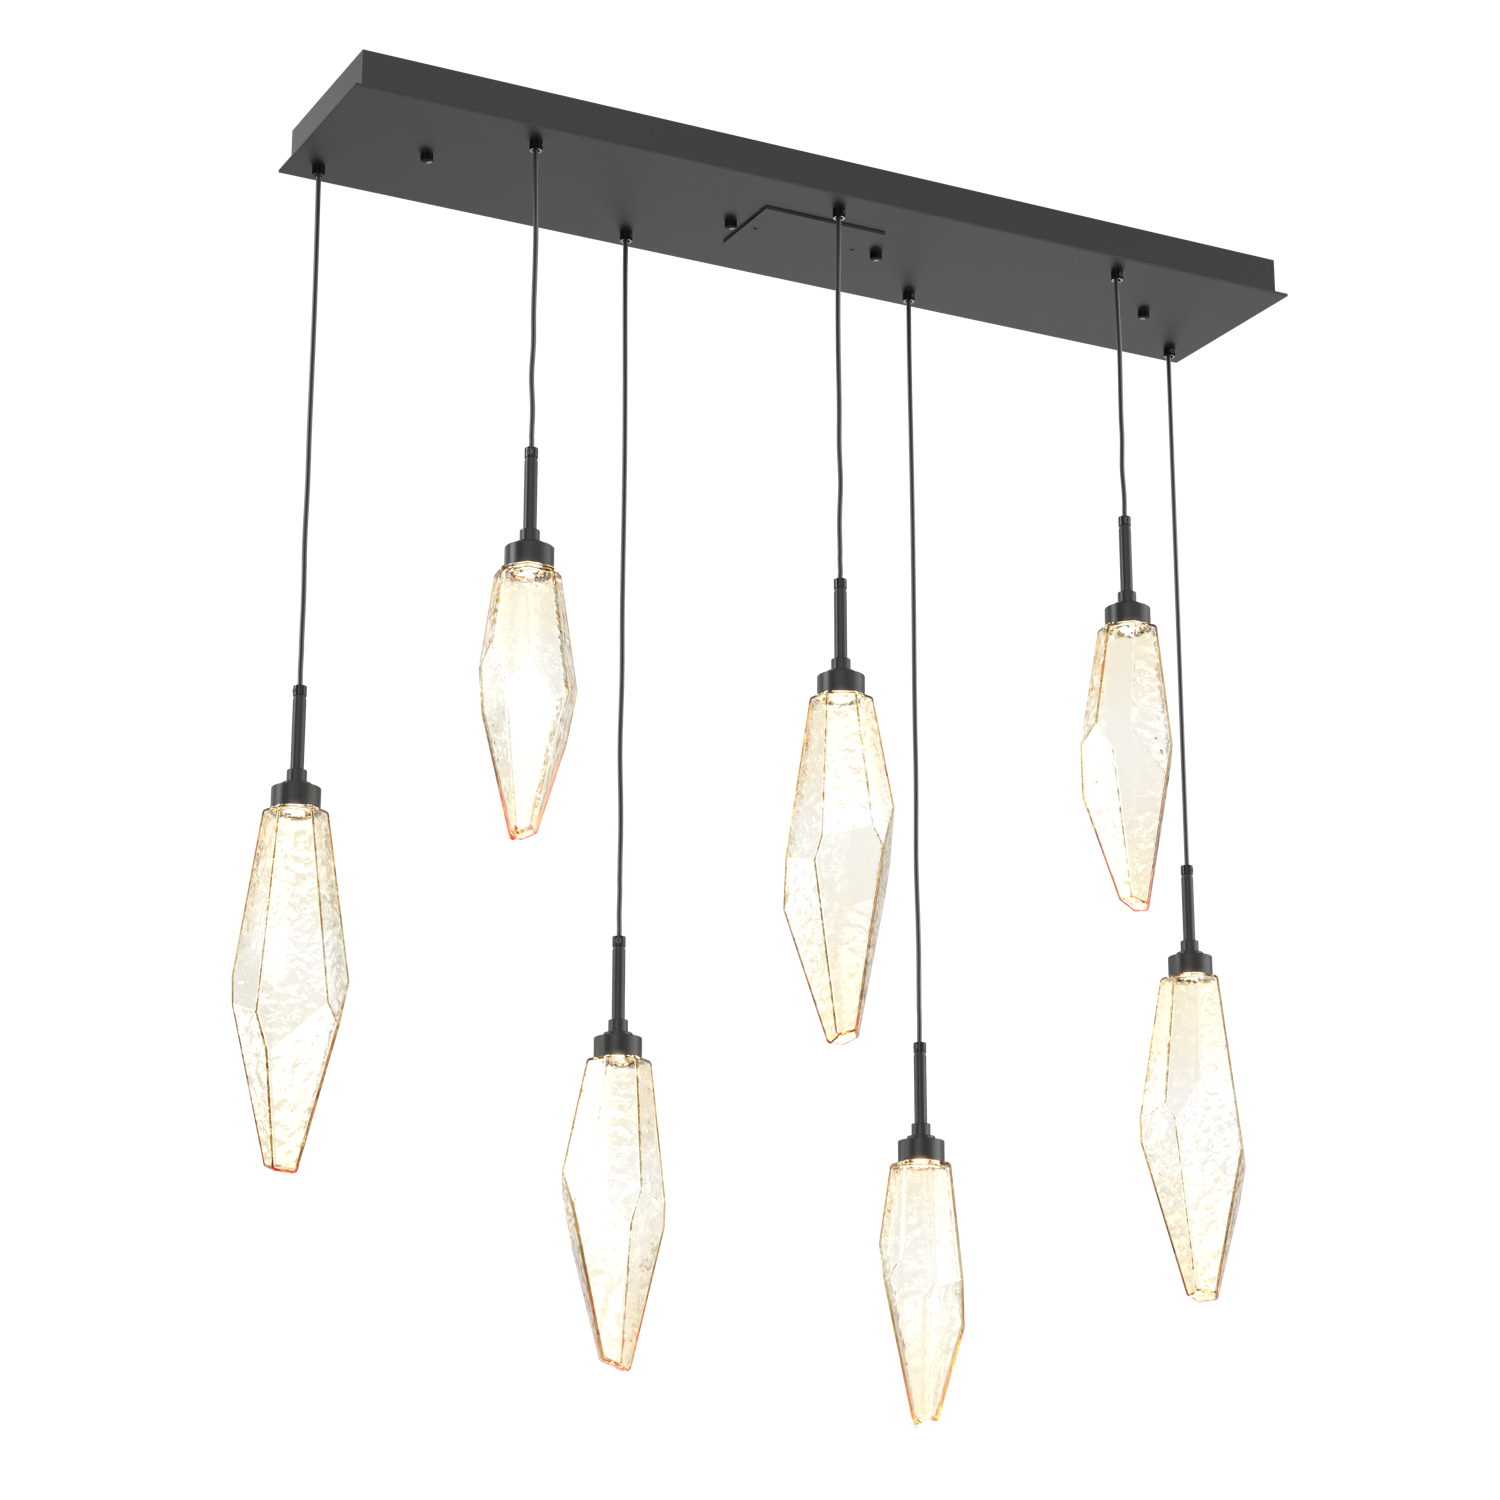 PLB0050-07-MB-CA-Hammerton-Studio-Rock-Crystal-7-light-linear-pendant-chandelier-with-matte-black-finish-and-chilled-amber-blown-glass-shades-and-LED-lamping